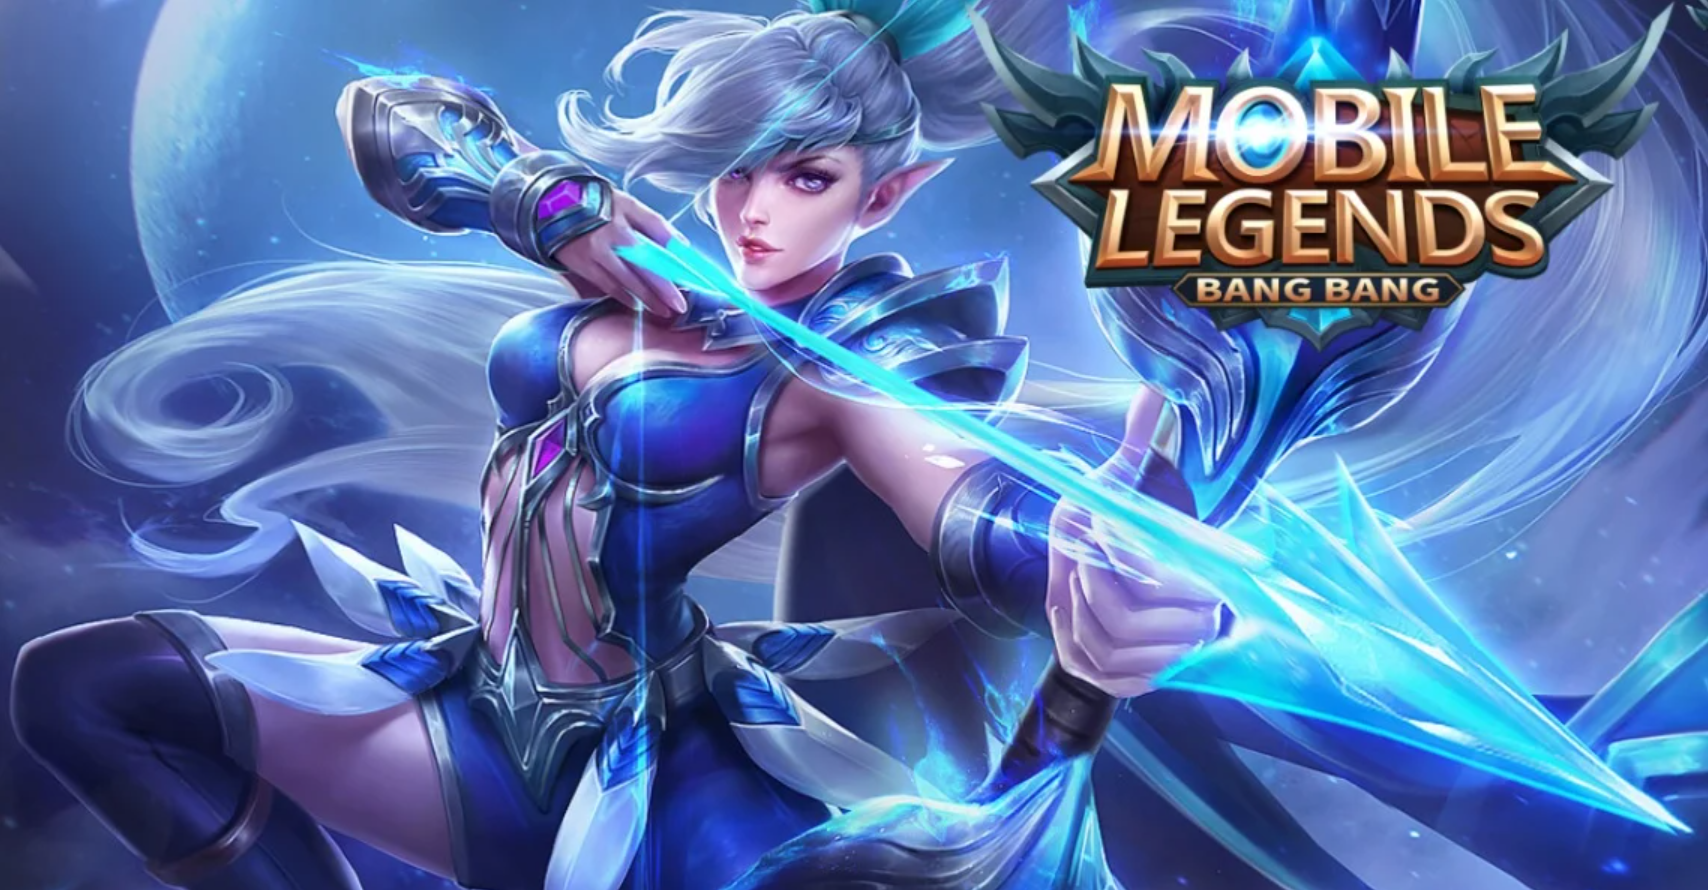 Mobile Legends Sued Again by Riot Games, What's Up?